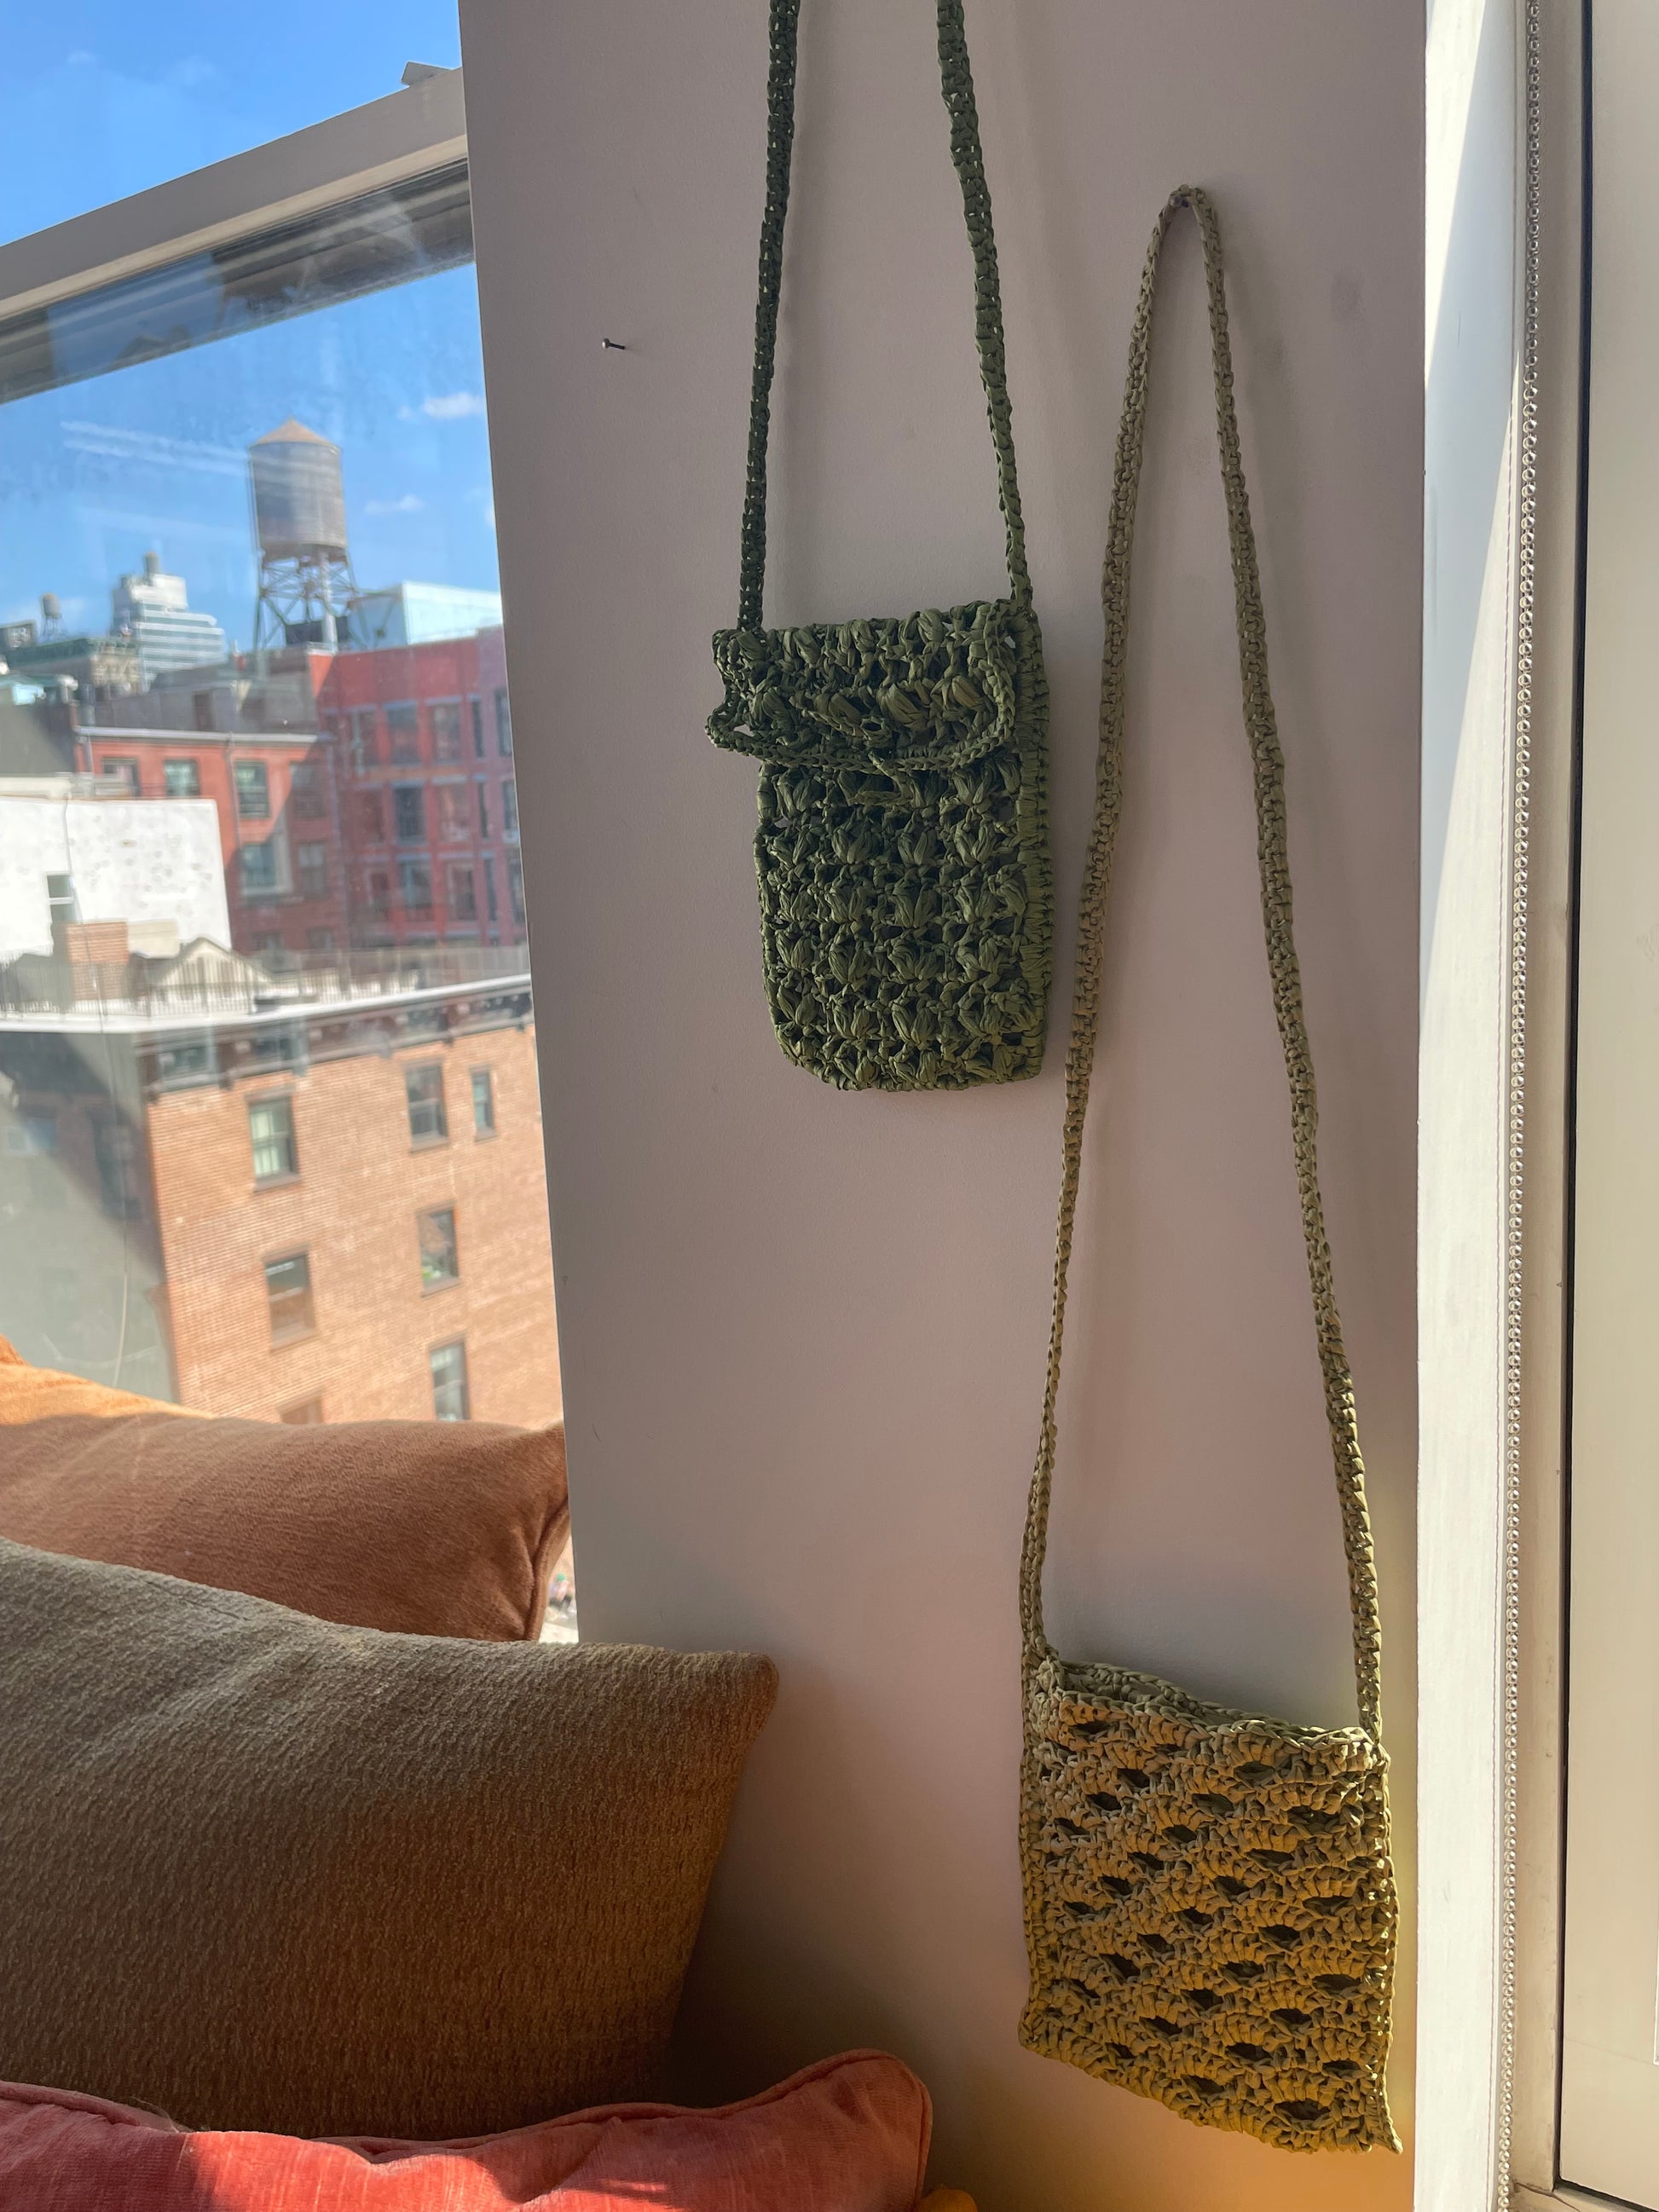 The two crossbody raffia bags hung on the wall 